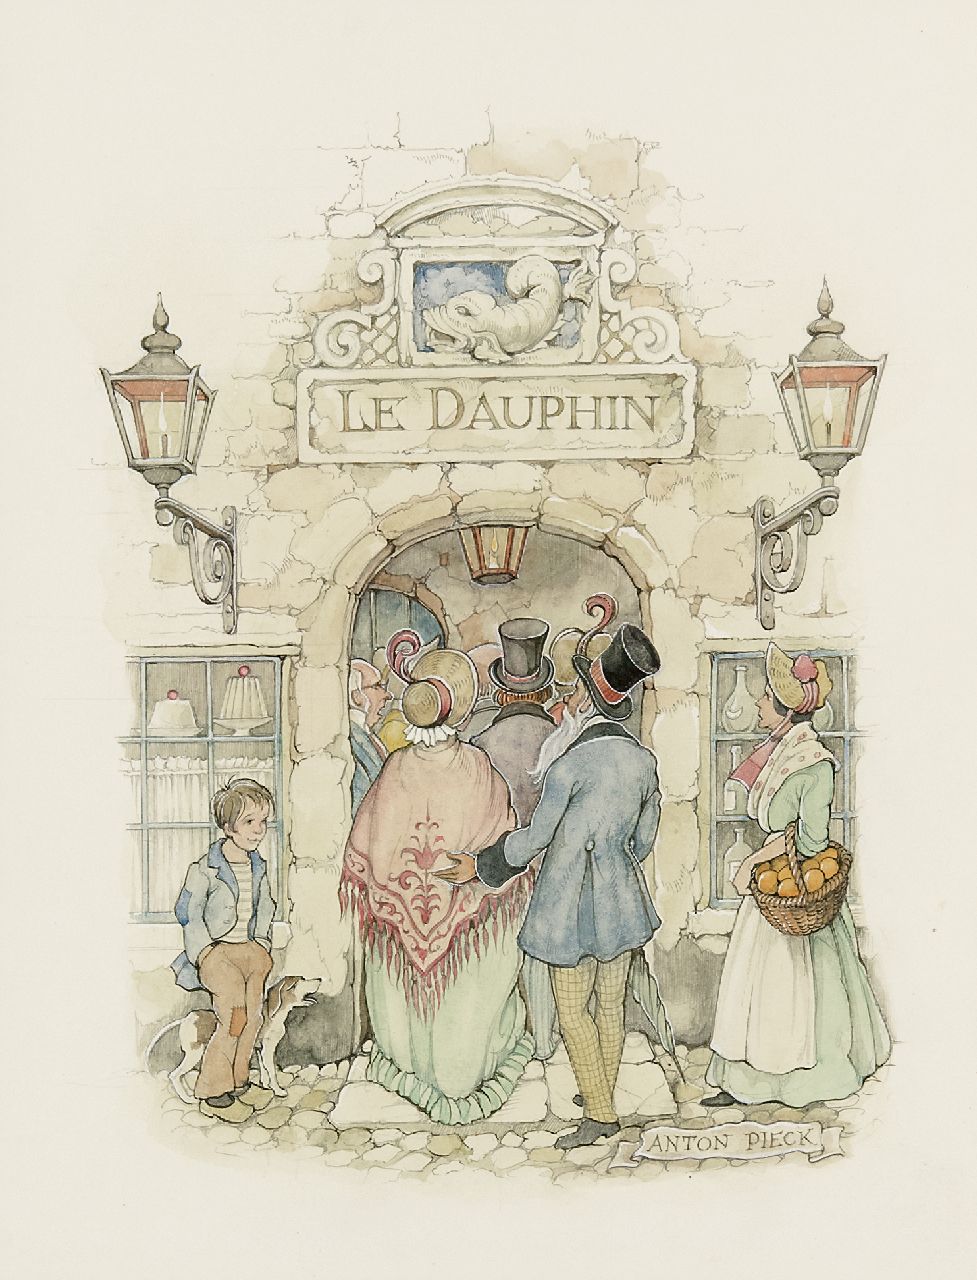 Pieck A.F.  | 'Anton' Franciscus Pieck, Company entering 'Le Dauphin', pencil and watercolour on paper 29.7 x 23.0 cm, signed l.r.